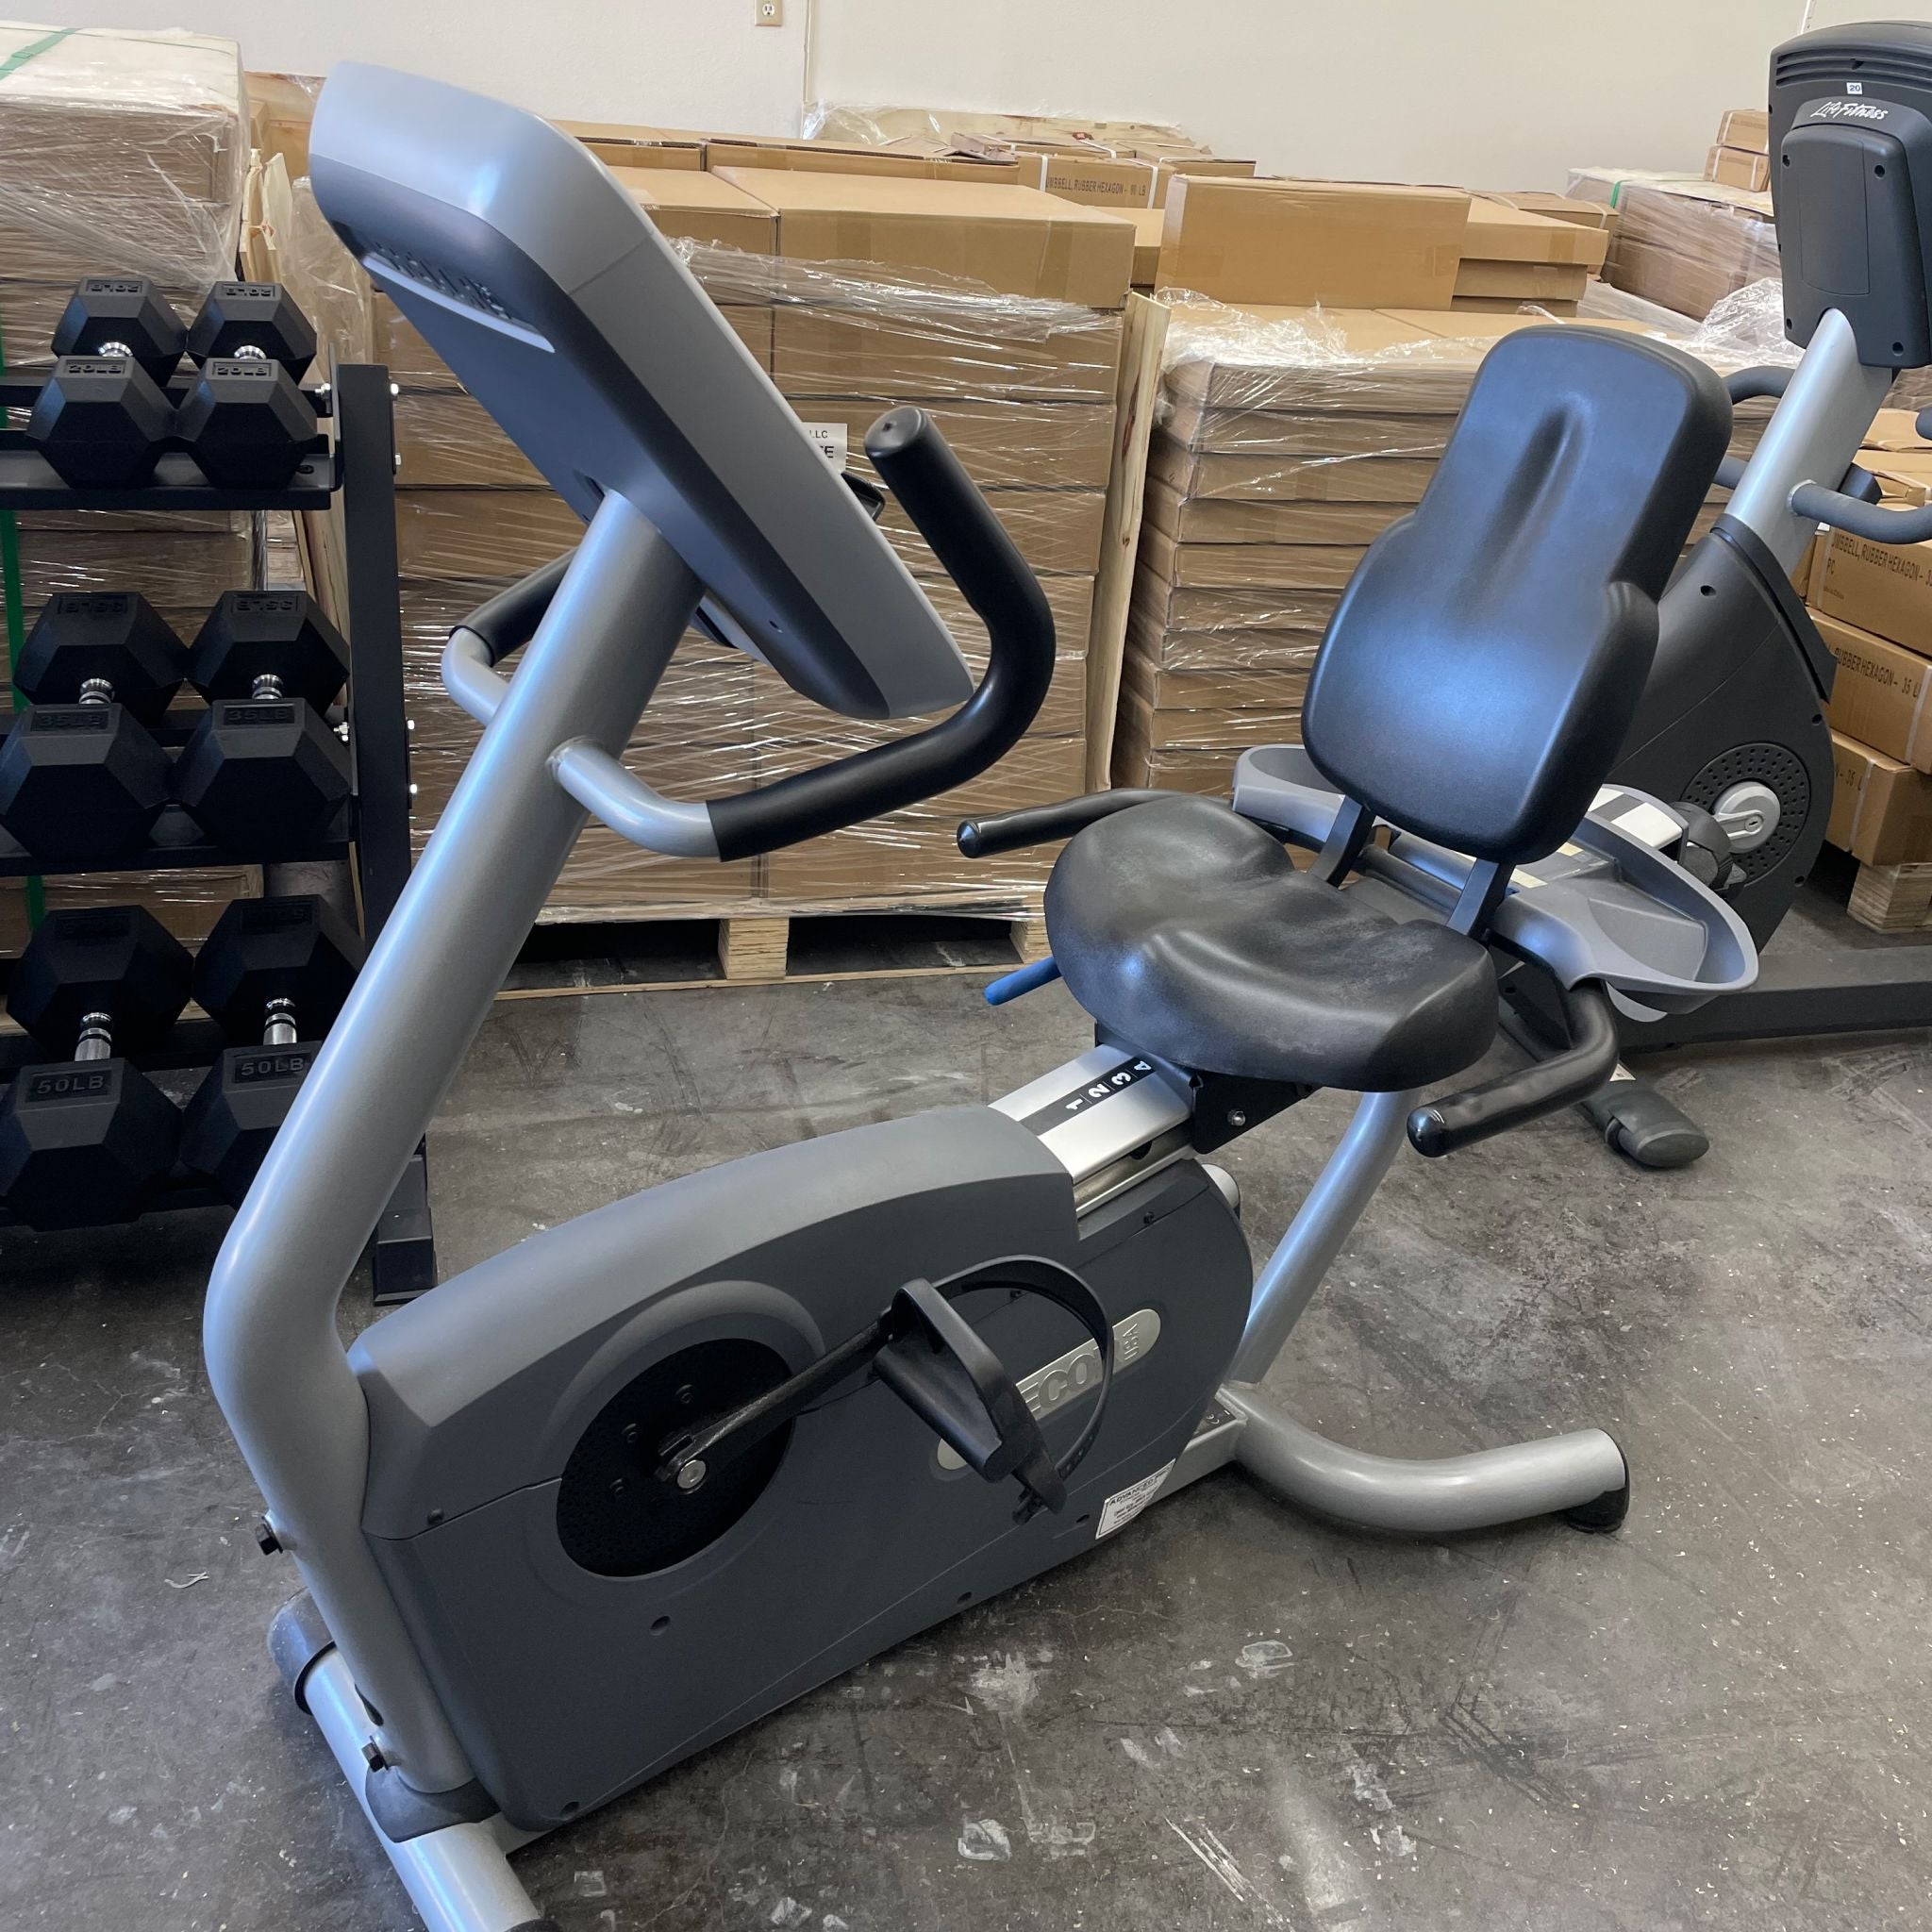 Front right view of the Precor c846i Recumbent Bike in Warehouse